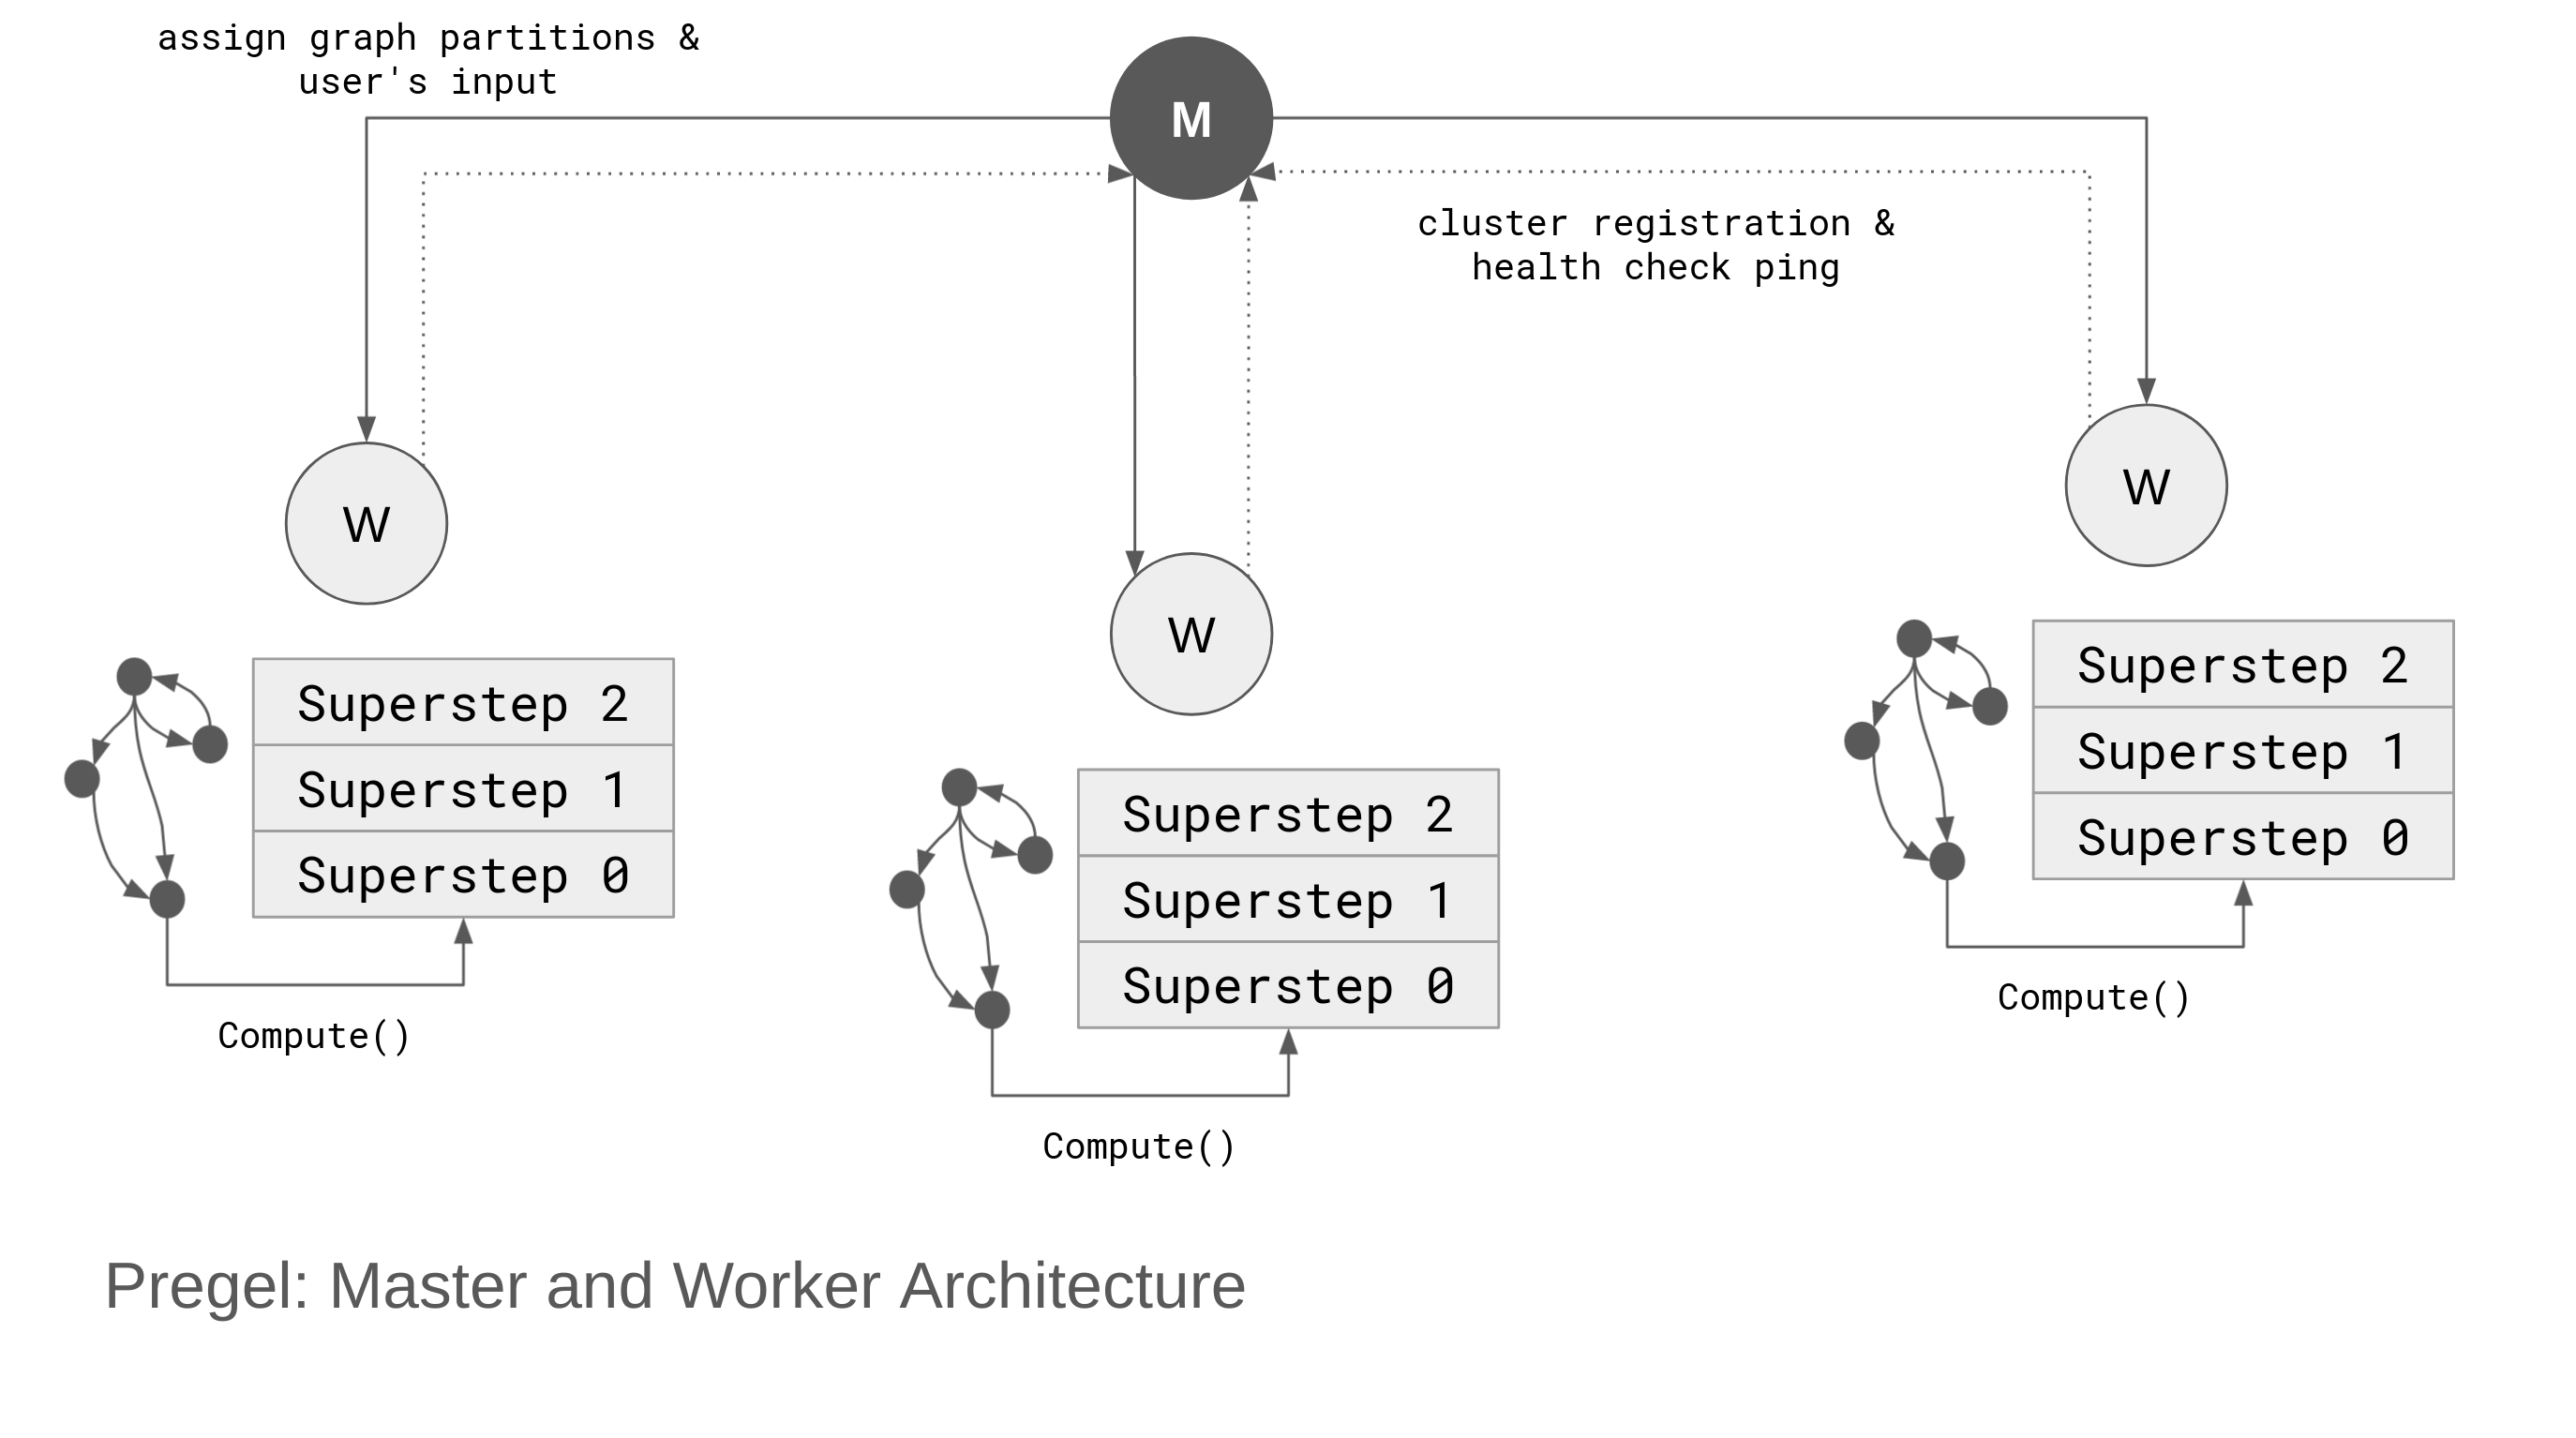 Master and Worker Architecture